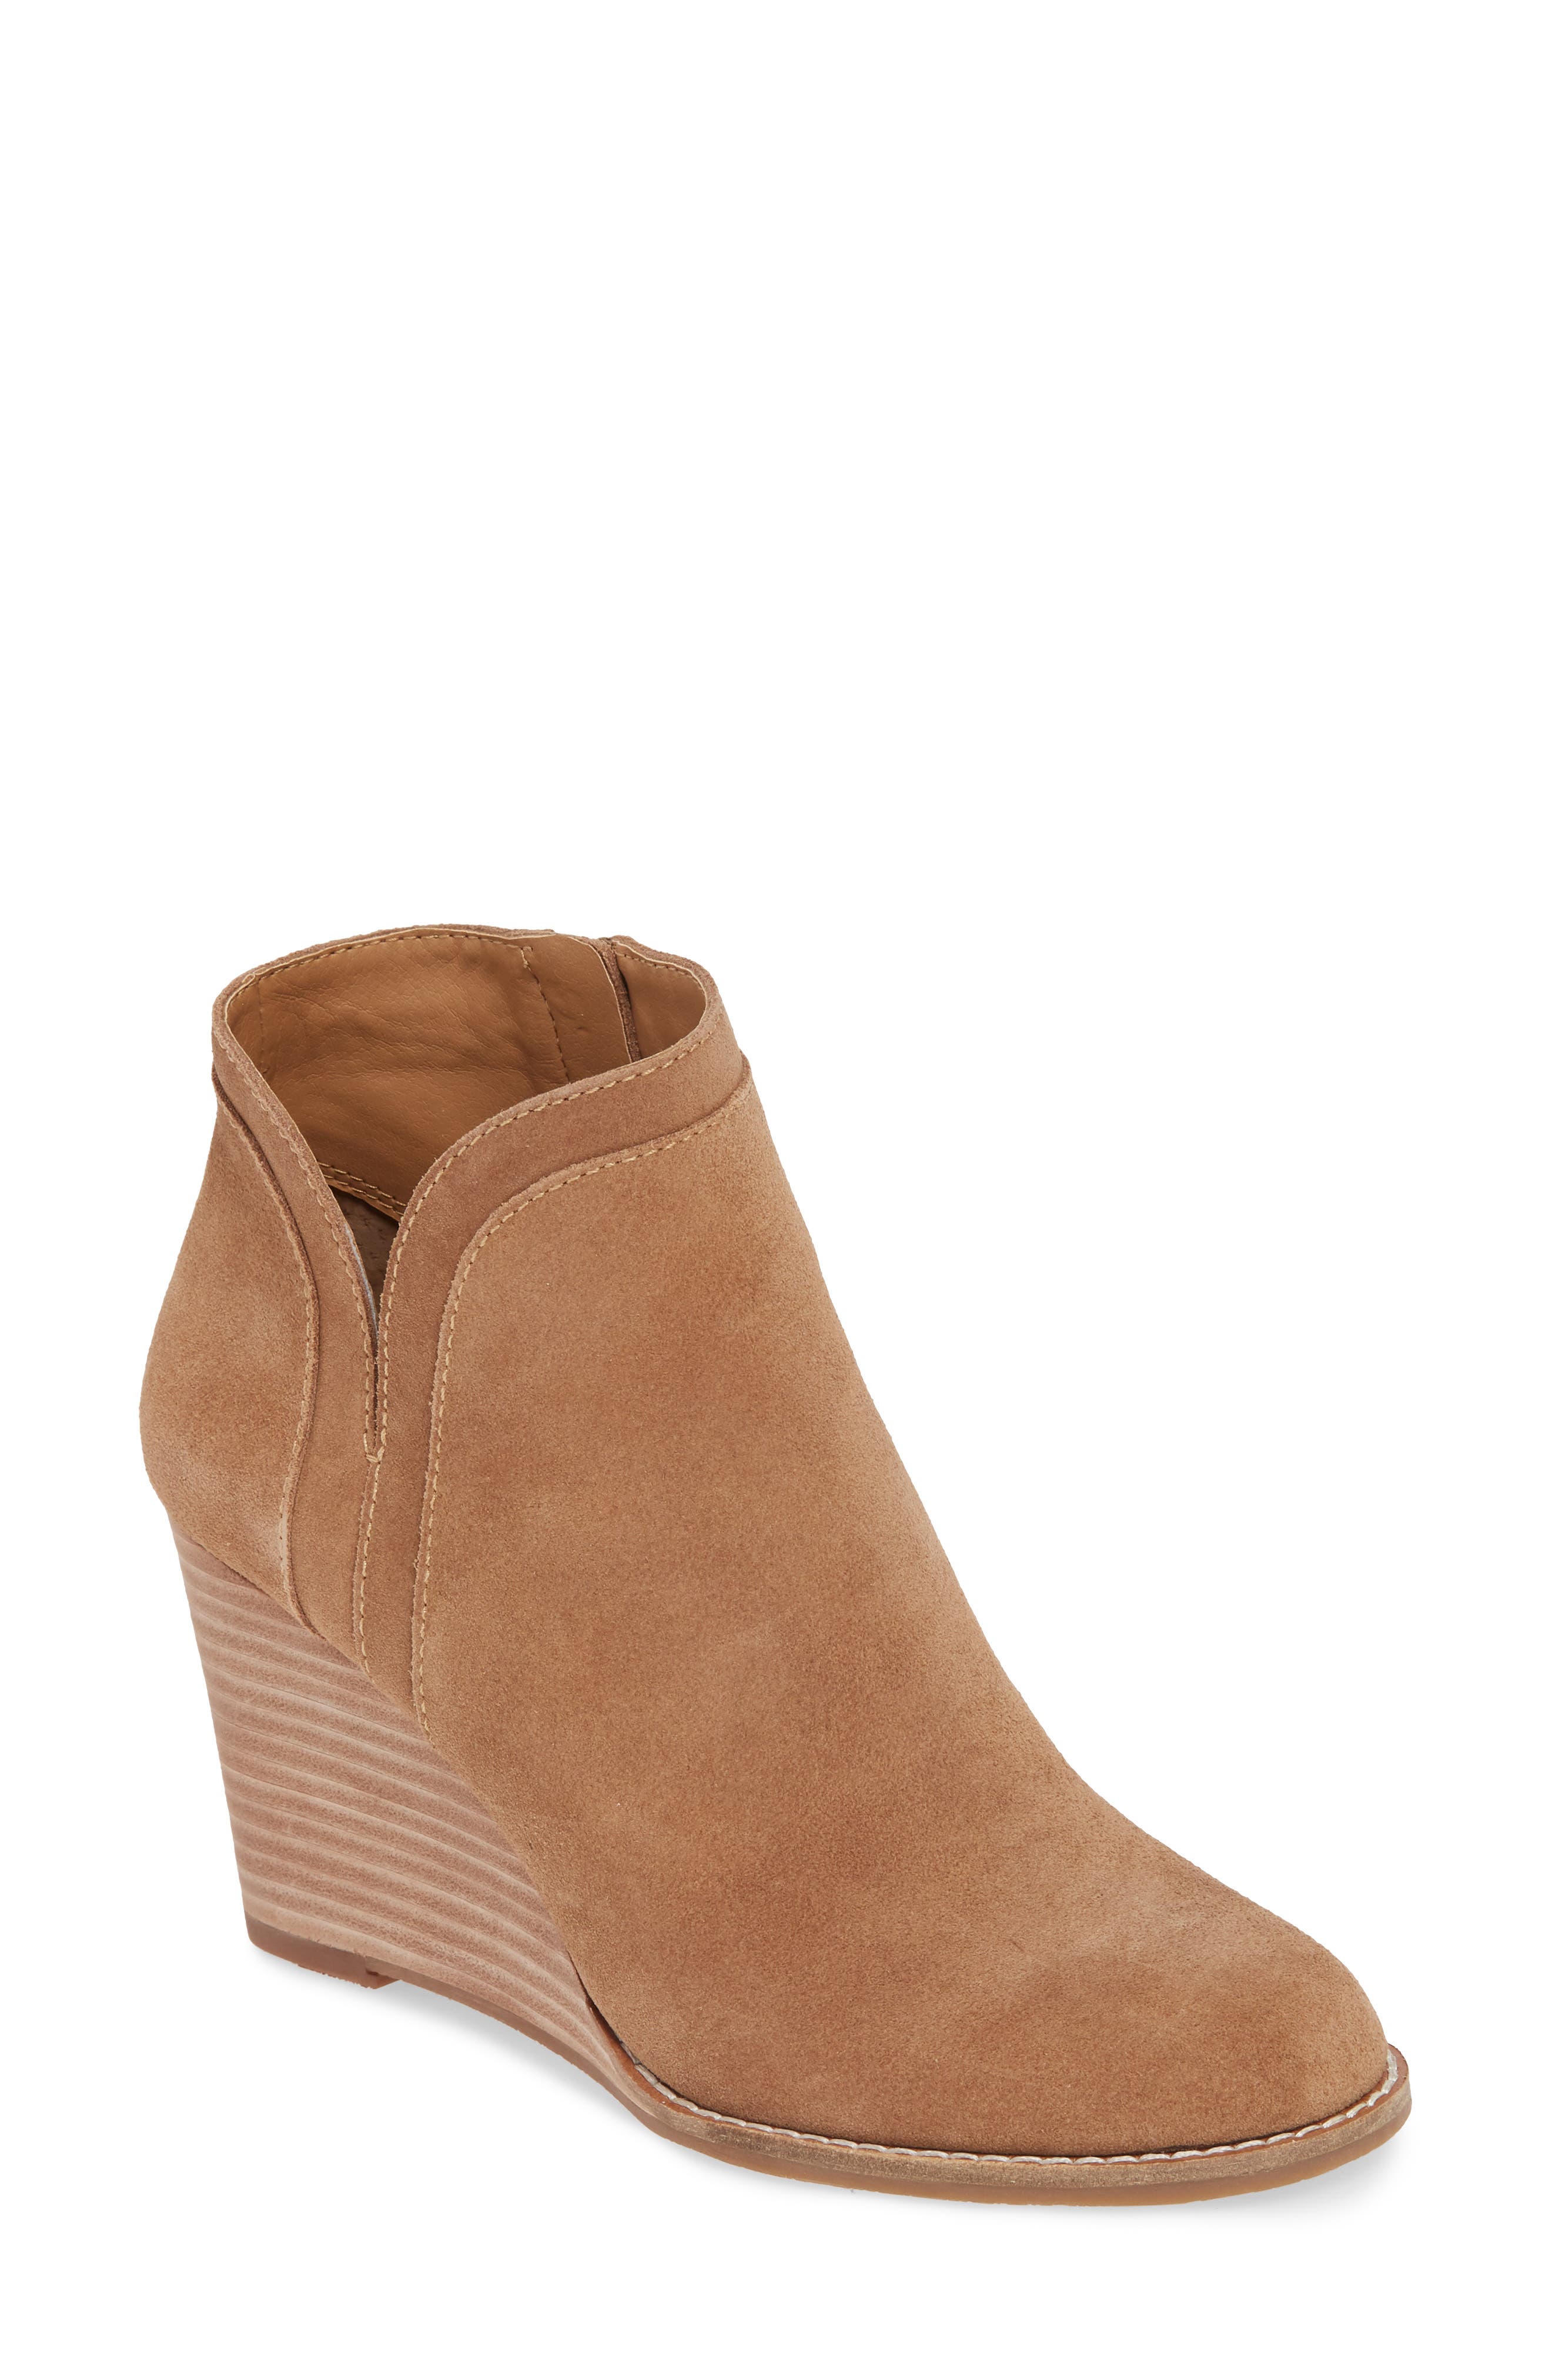 lucky brand yimmie oiled suede wedge booties